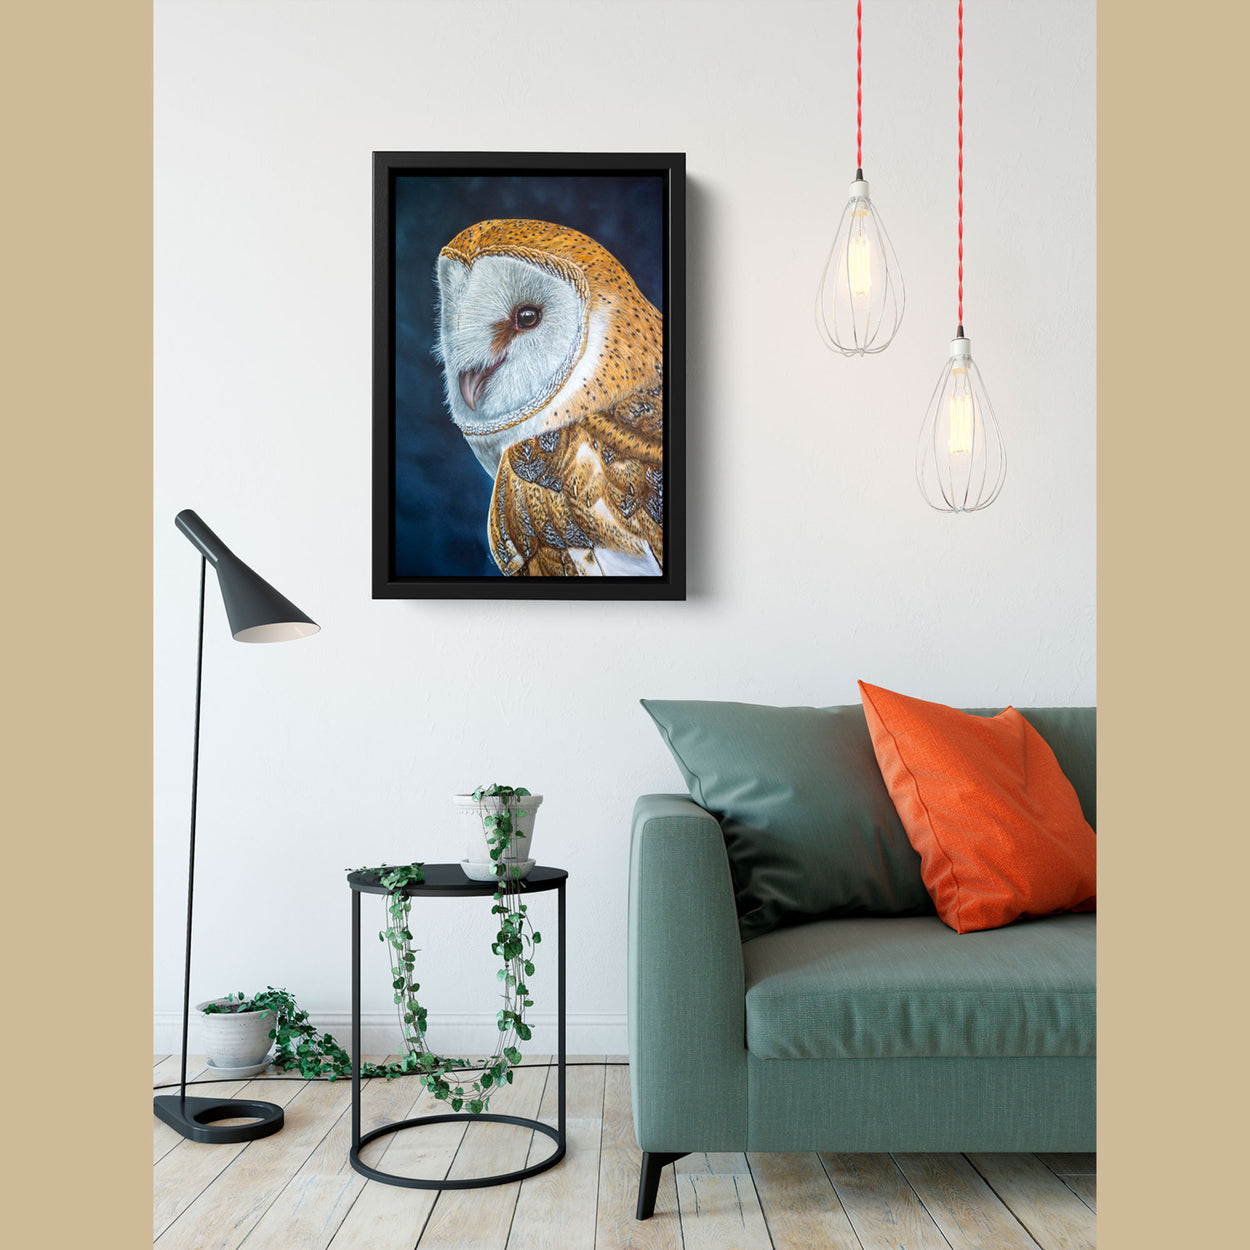 Barn Owl Oil Painting on Wall - Jill Dimond The Thriving Wild